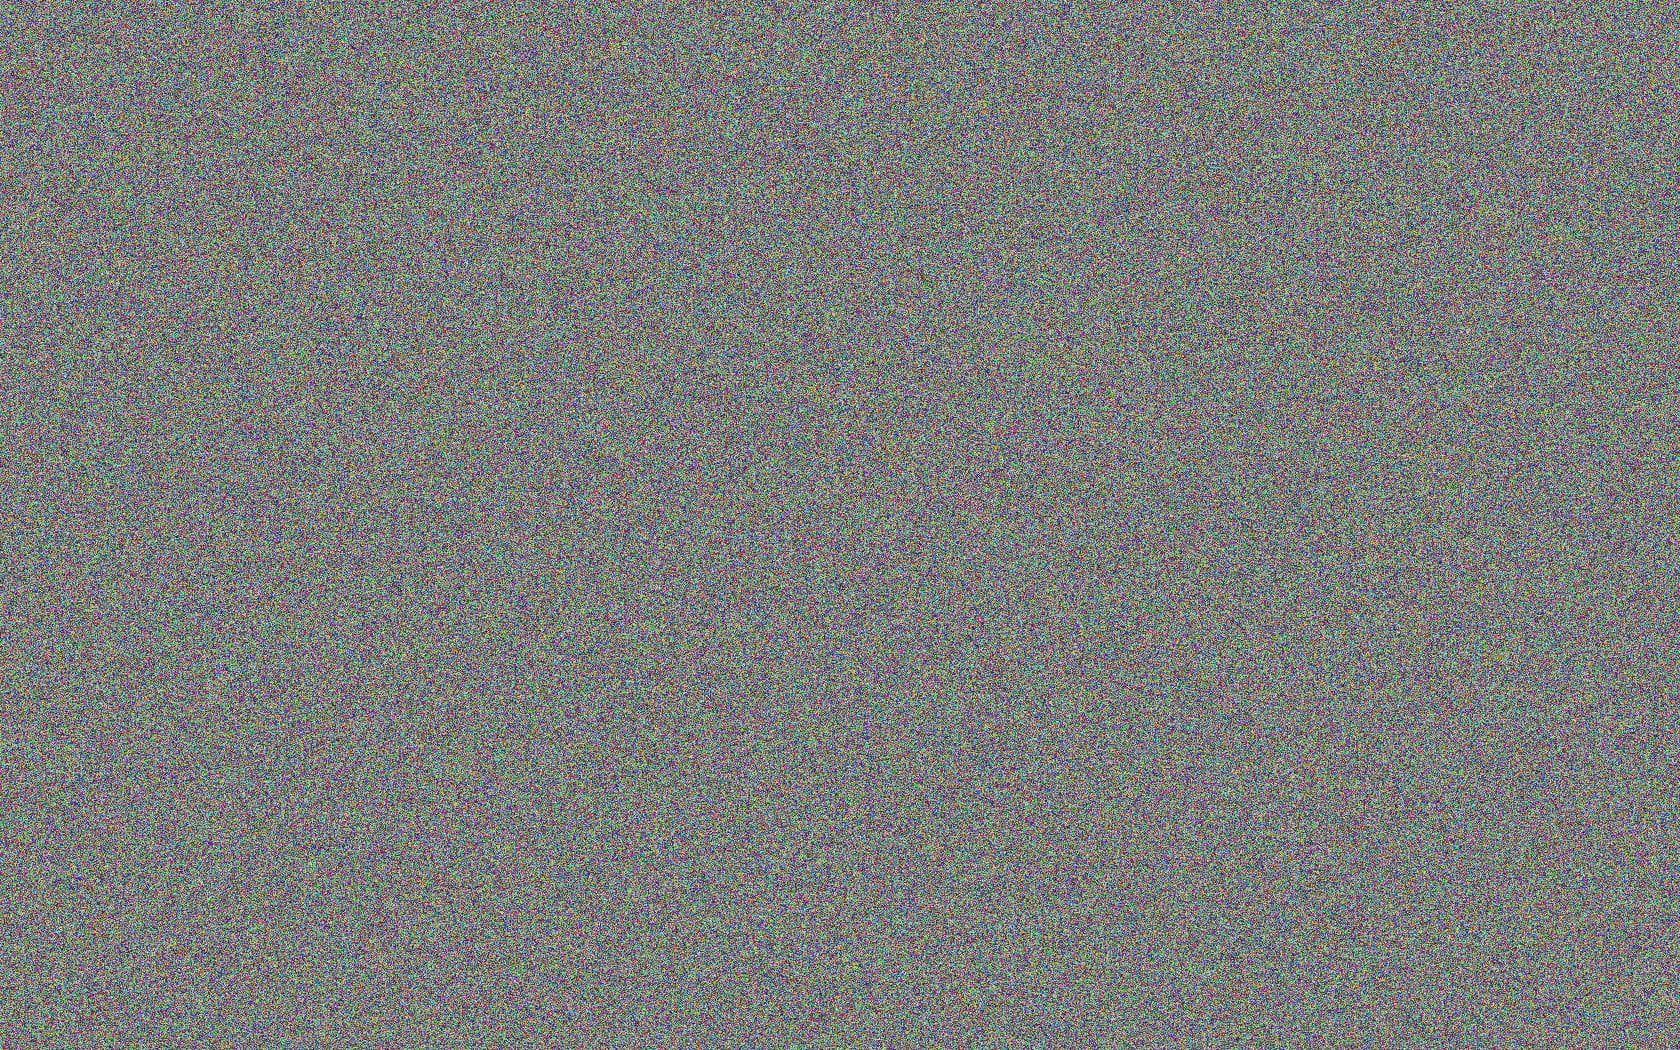 The entire image is static noise.